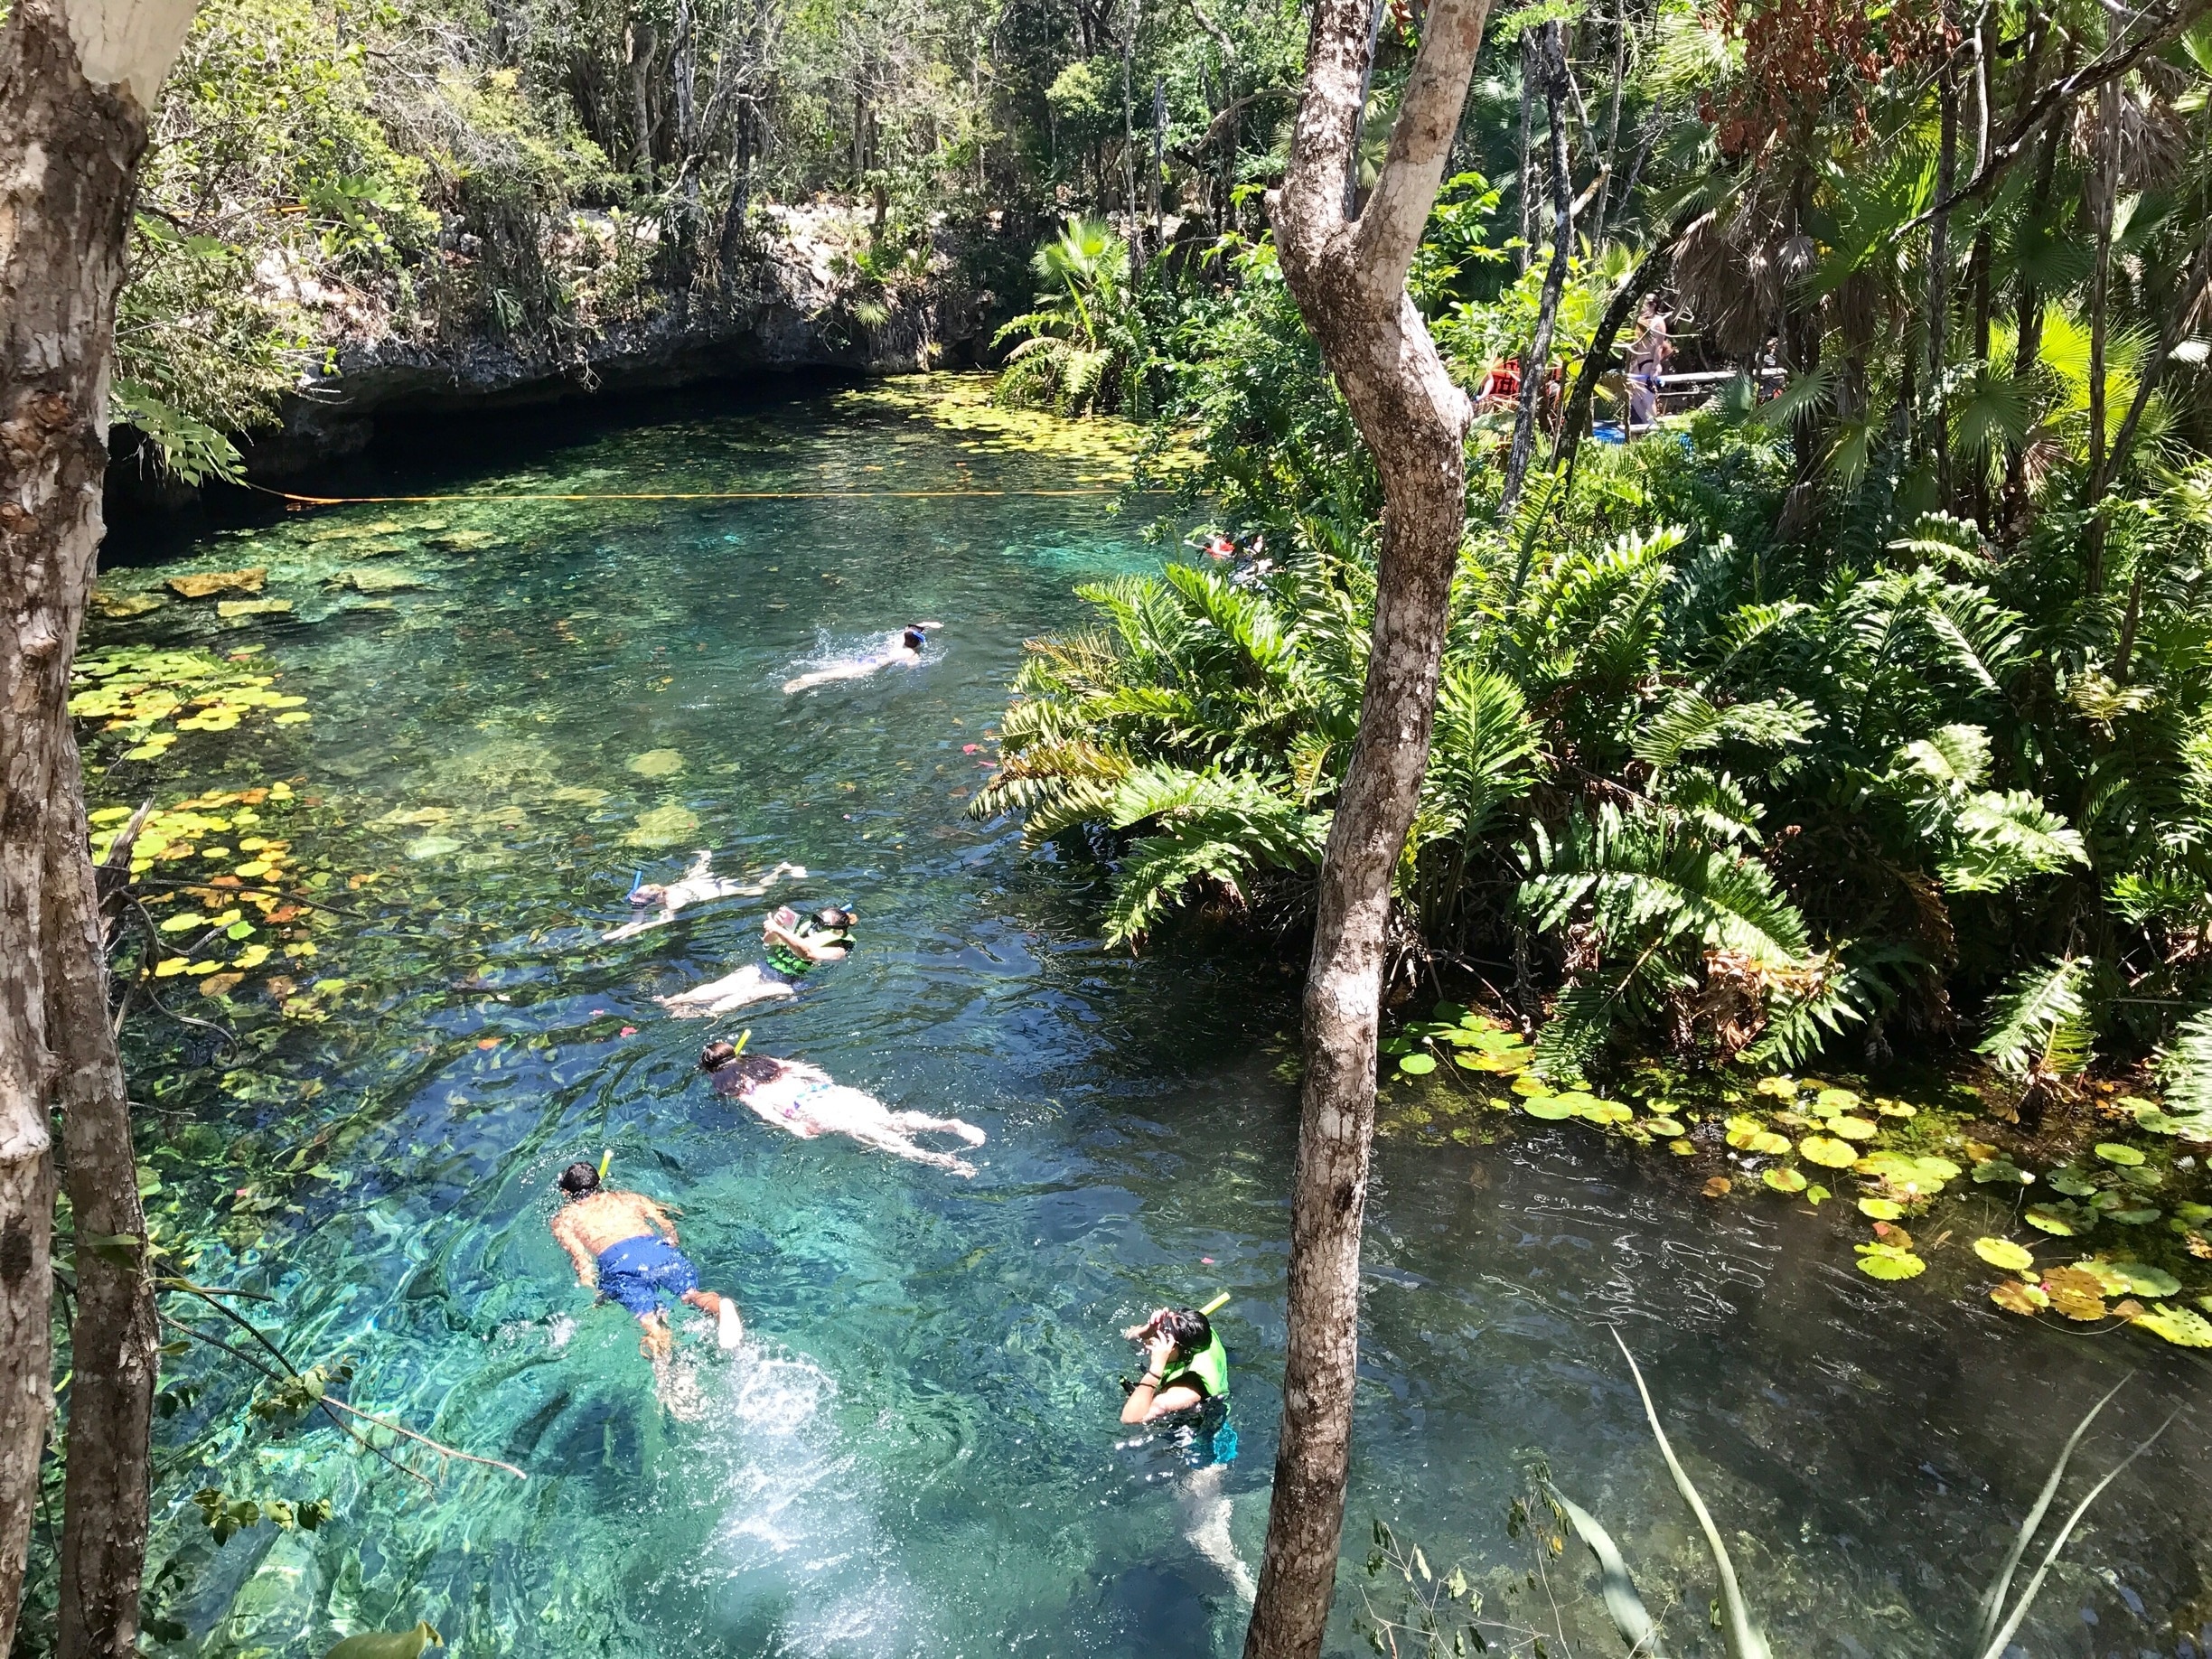 Beautiful experience snorkeling through this cenote. 